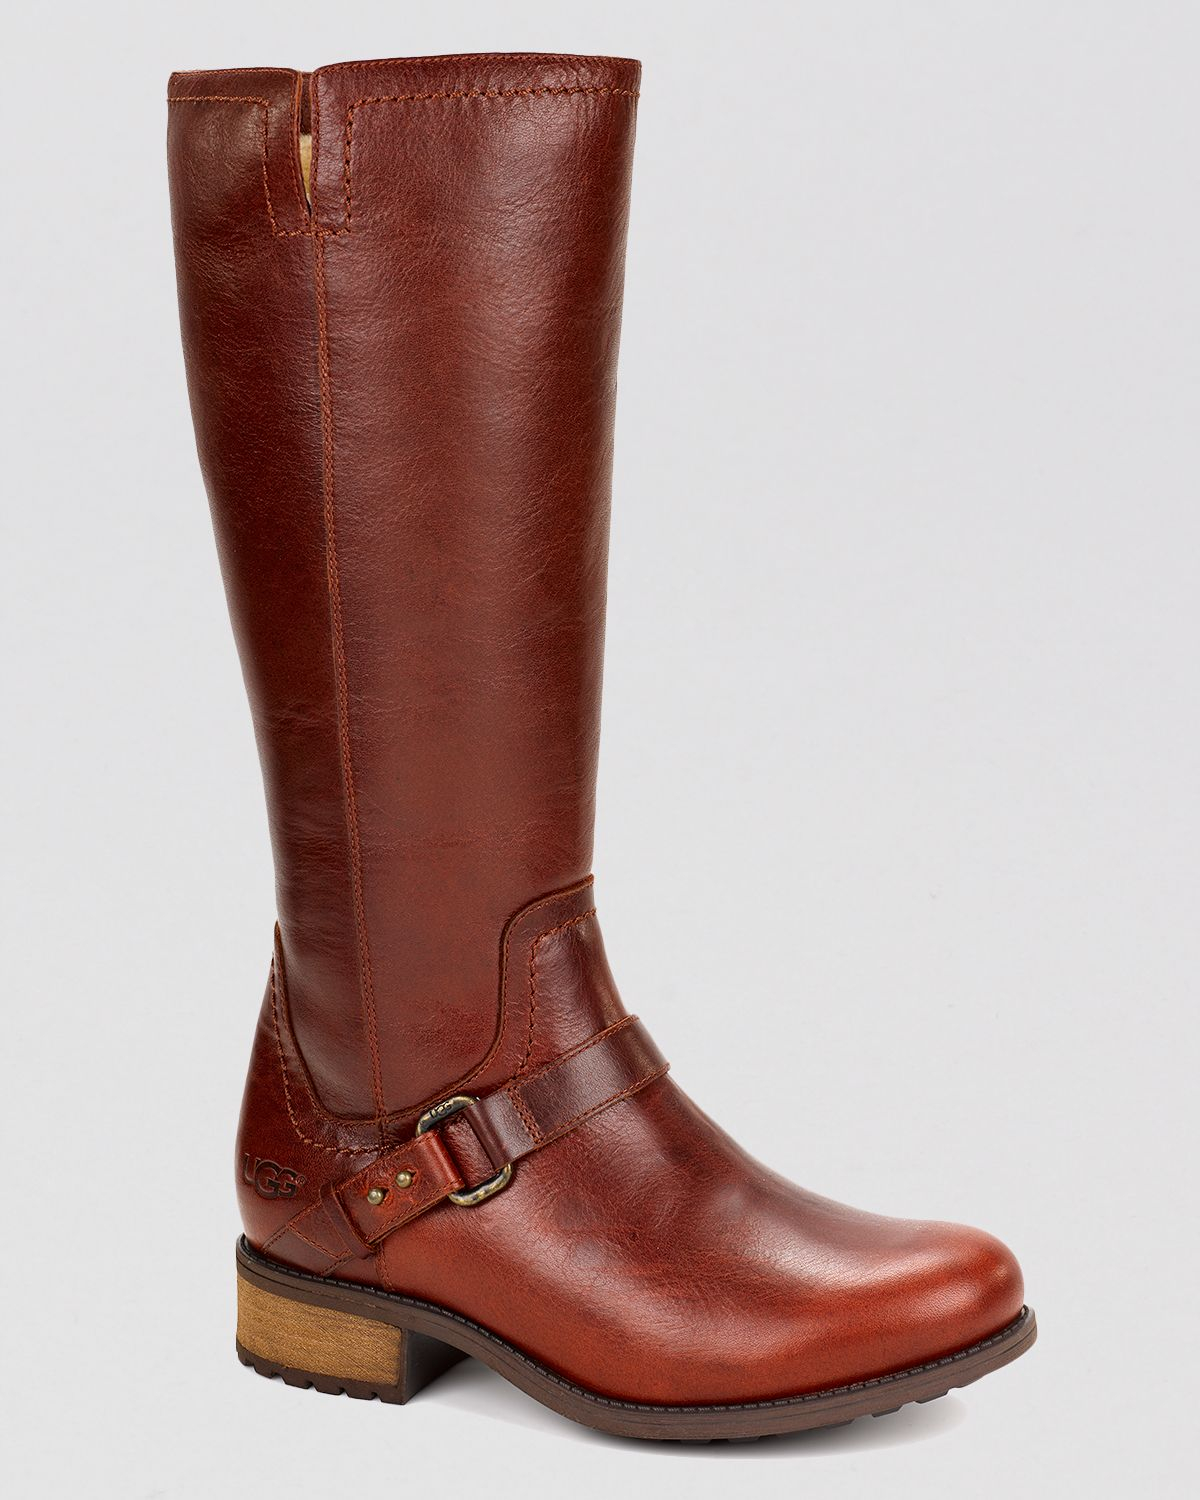 Lyst - Ugg Ugg® Australia Tall Riding Boots - Dahlen in Brown